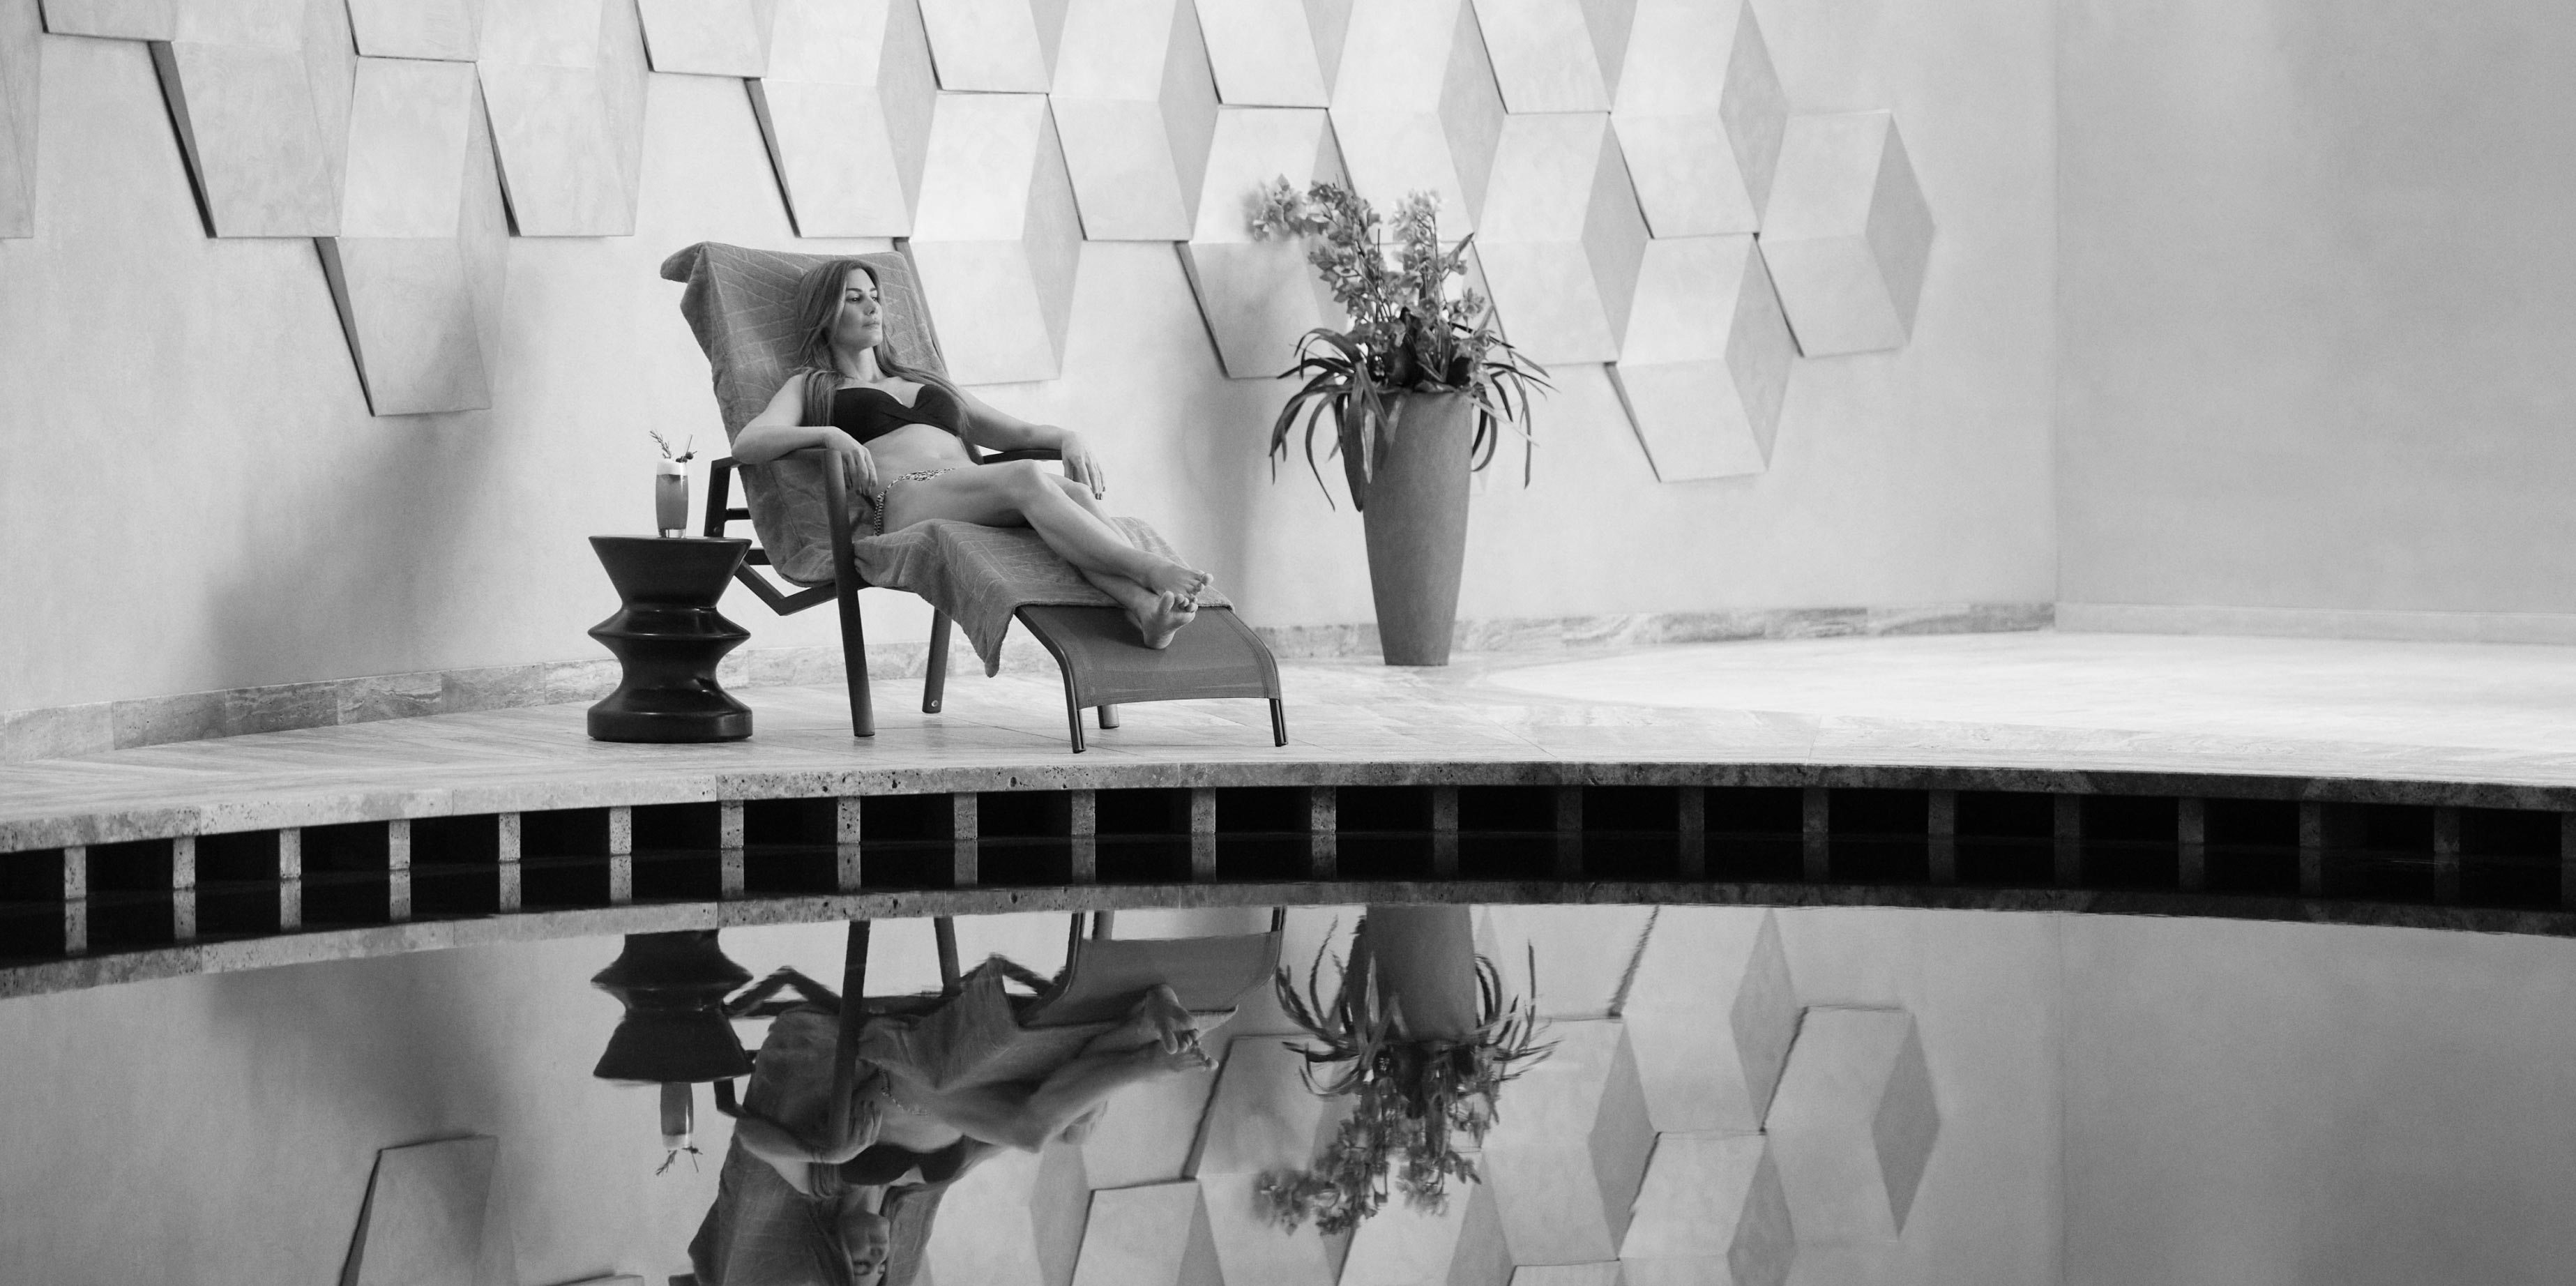 A black and white image of a relaxed woman lounging on a chair by a reflective pool, with a drink on a side table and geometric wall art in the background